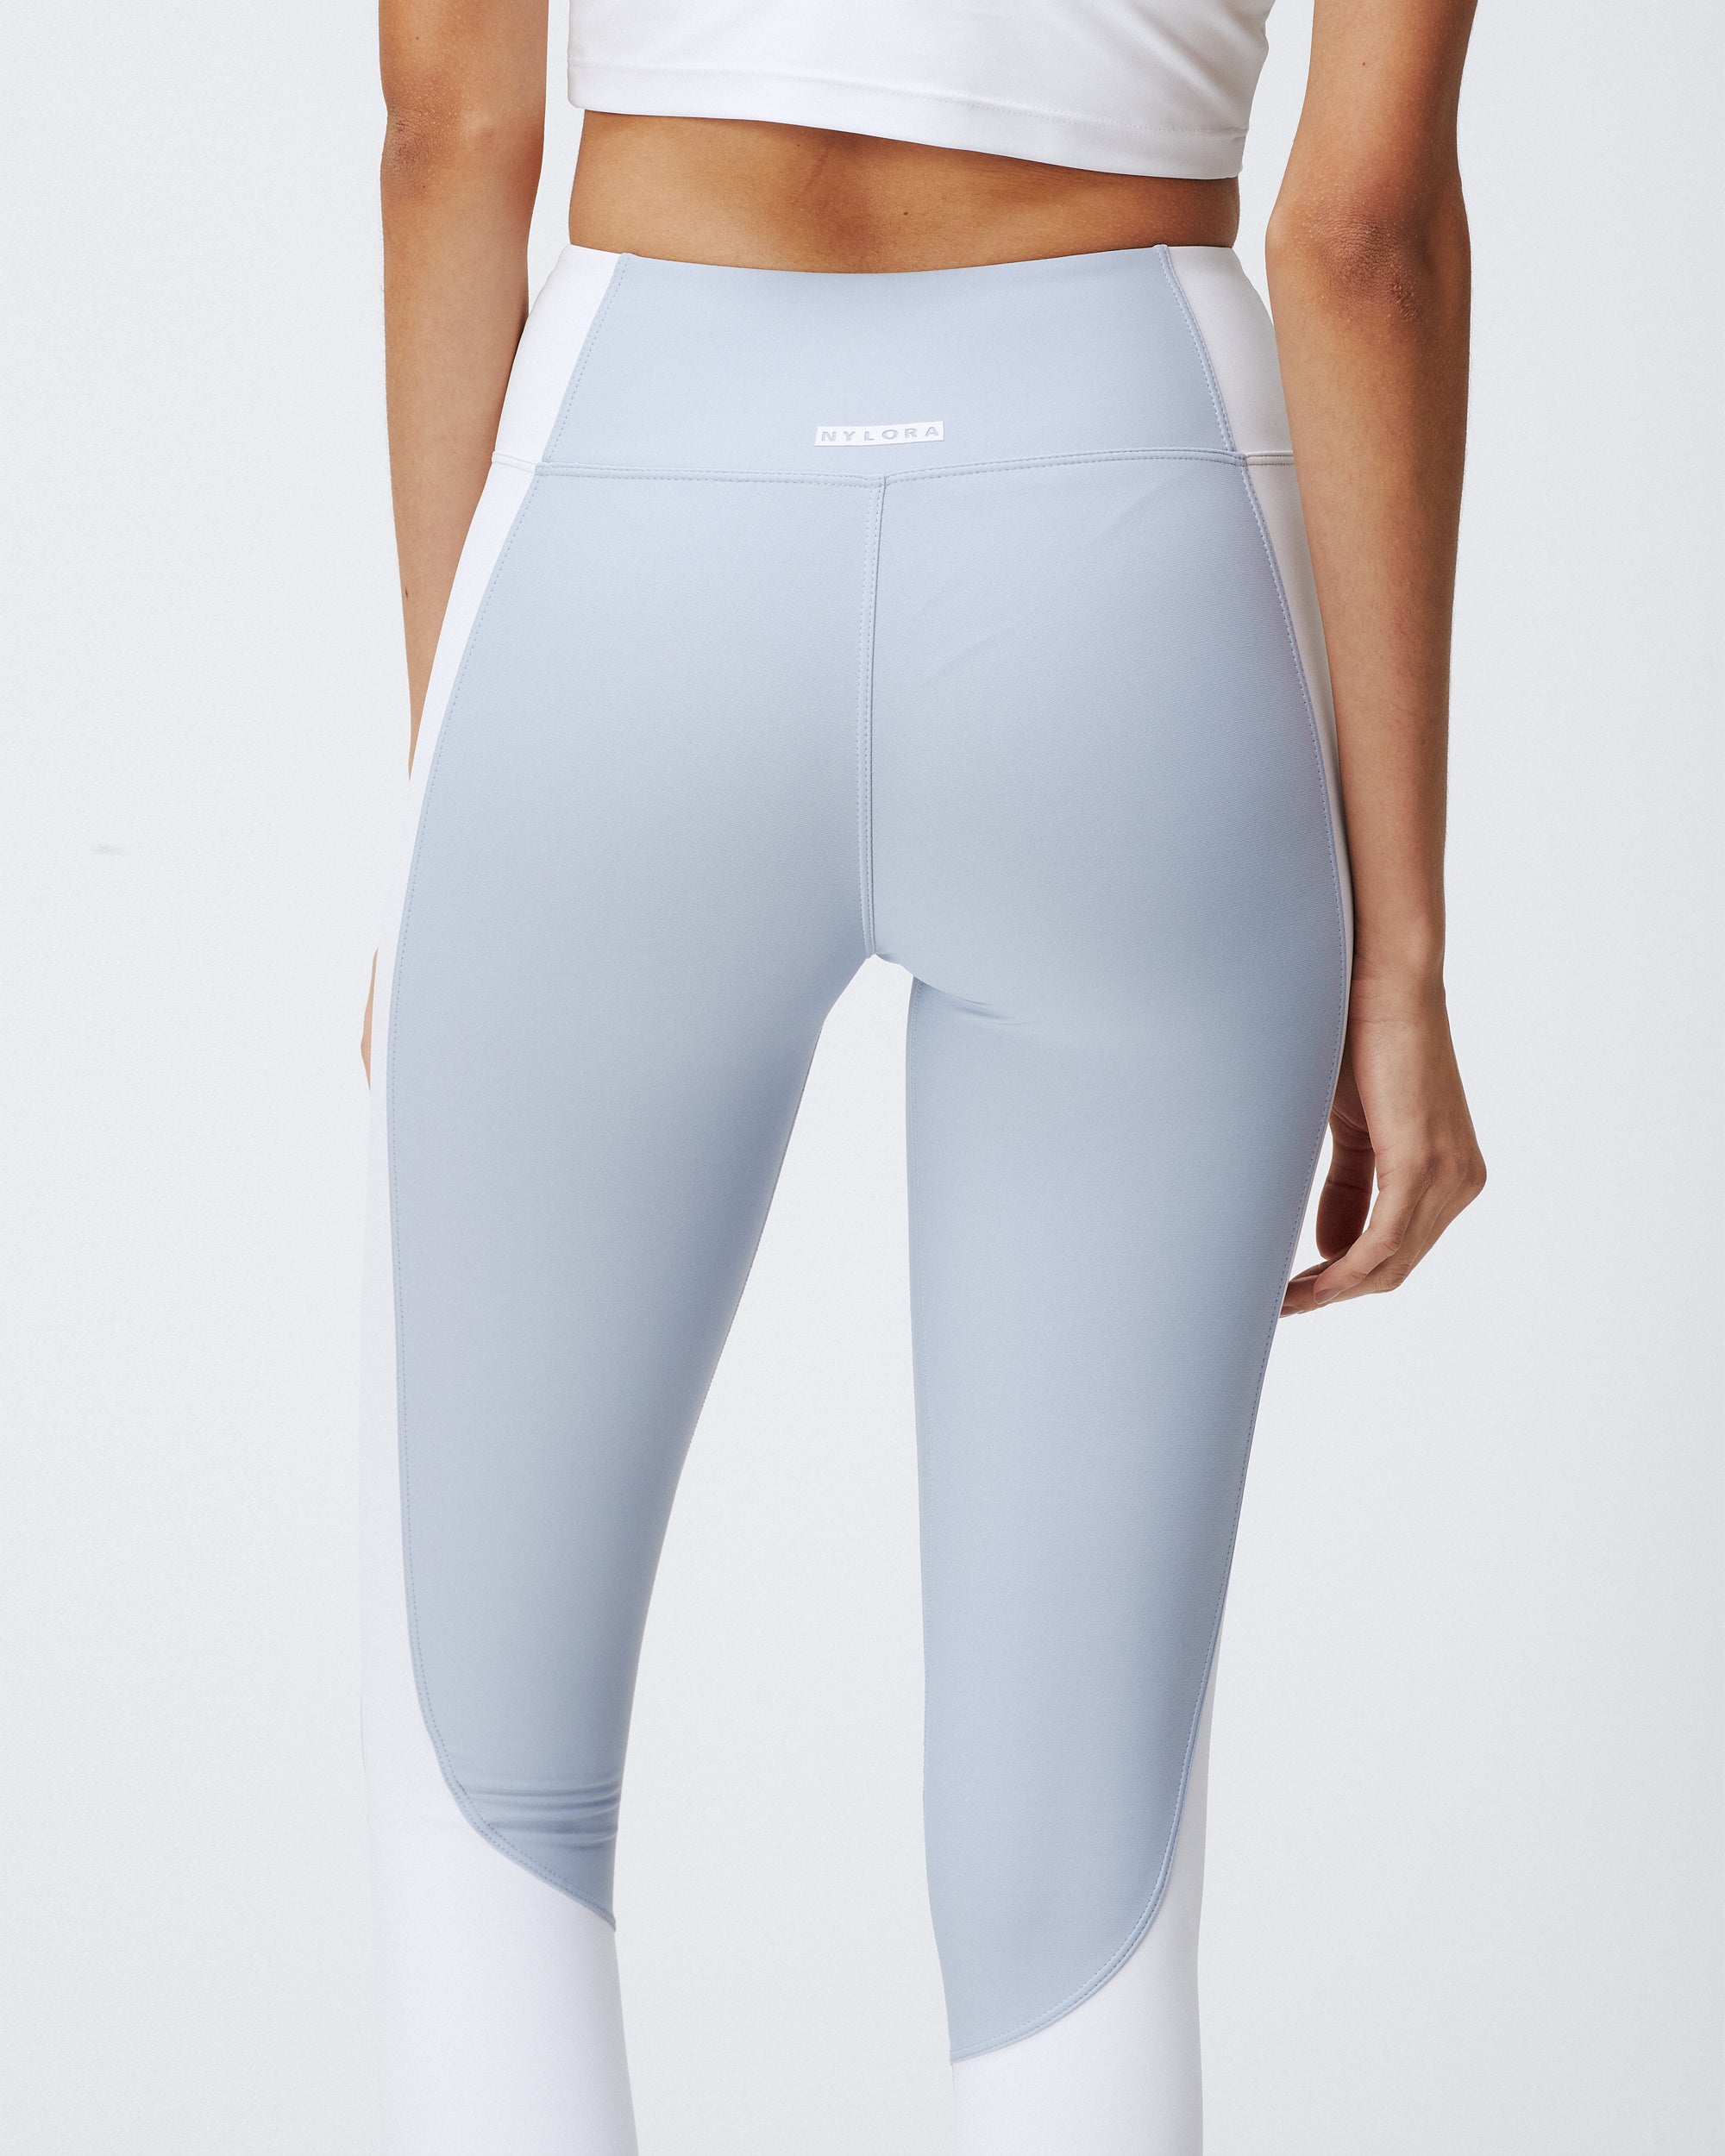 COLORFULAURORA ApparelSexy lady leggings Blue gray white stitching